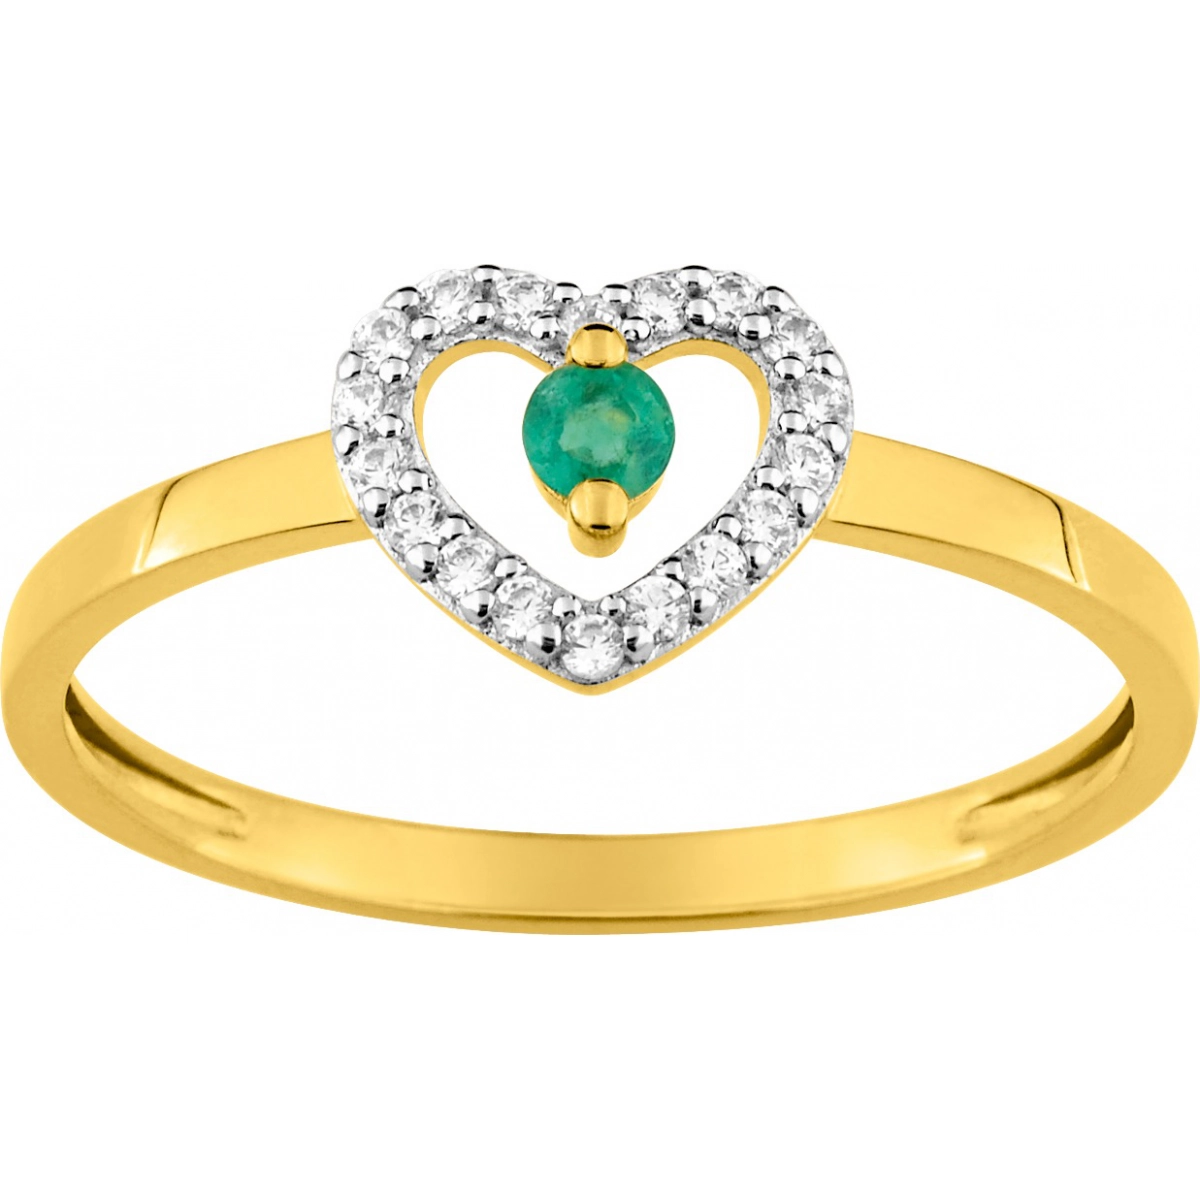 Ring w. emerald and cz 9K 2TG Lua Blanca  T35.58888 - Size 51